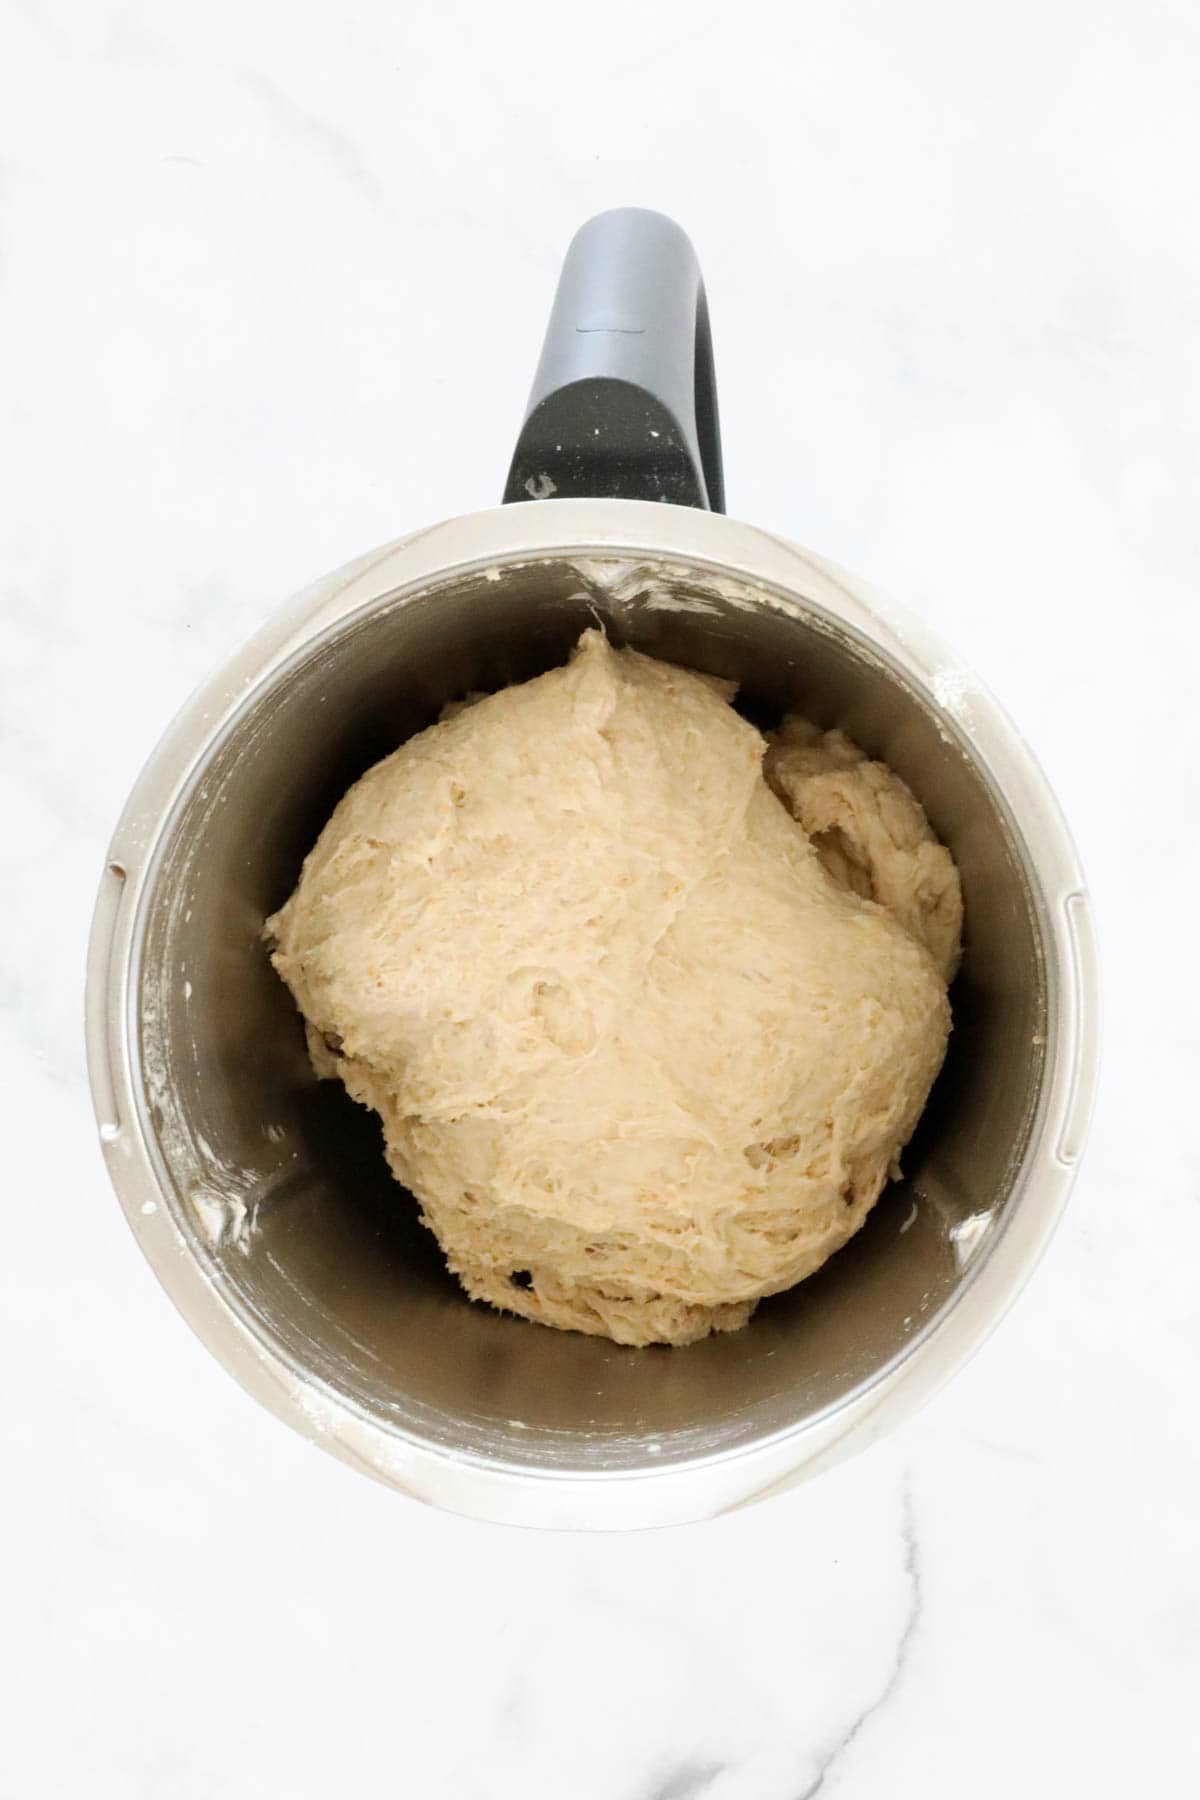 Dough in a Thermomix.